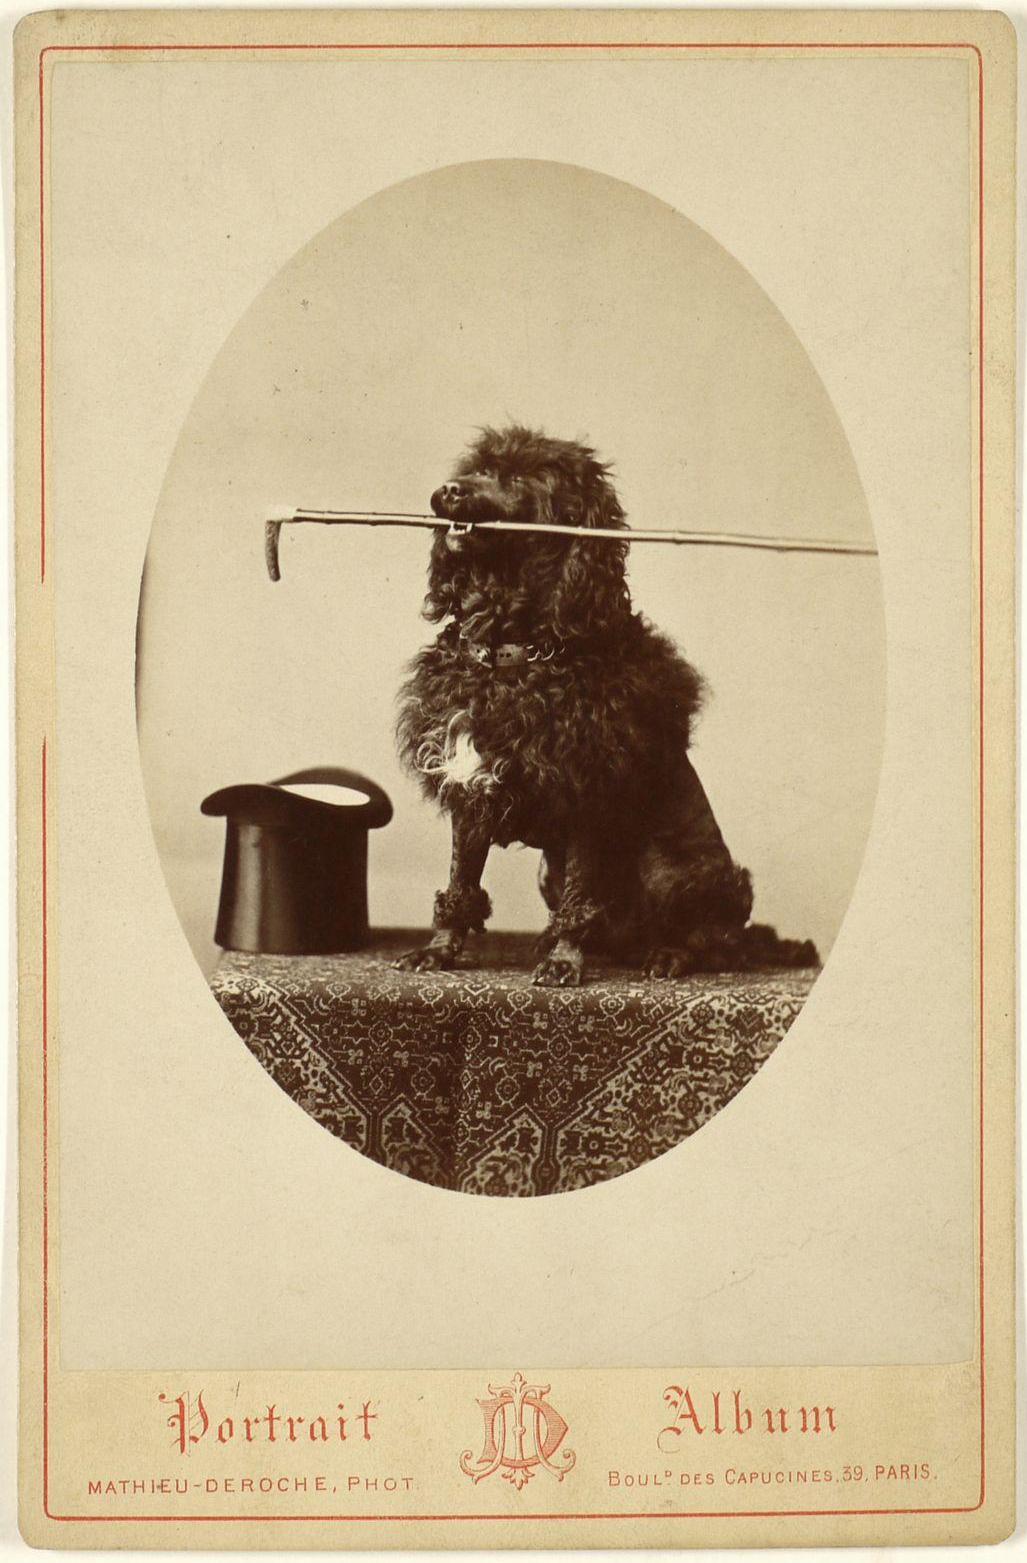 Click for larger image: Watercolour of Poodle with cane by Charles Ferdinand de Condamy (1855 - 1913) - Watercolour of Poodle with cane by Charles Ferdinand de Condamy (1855 - 1913)